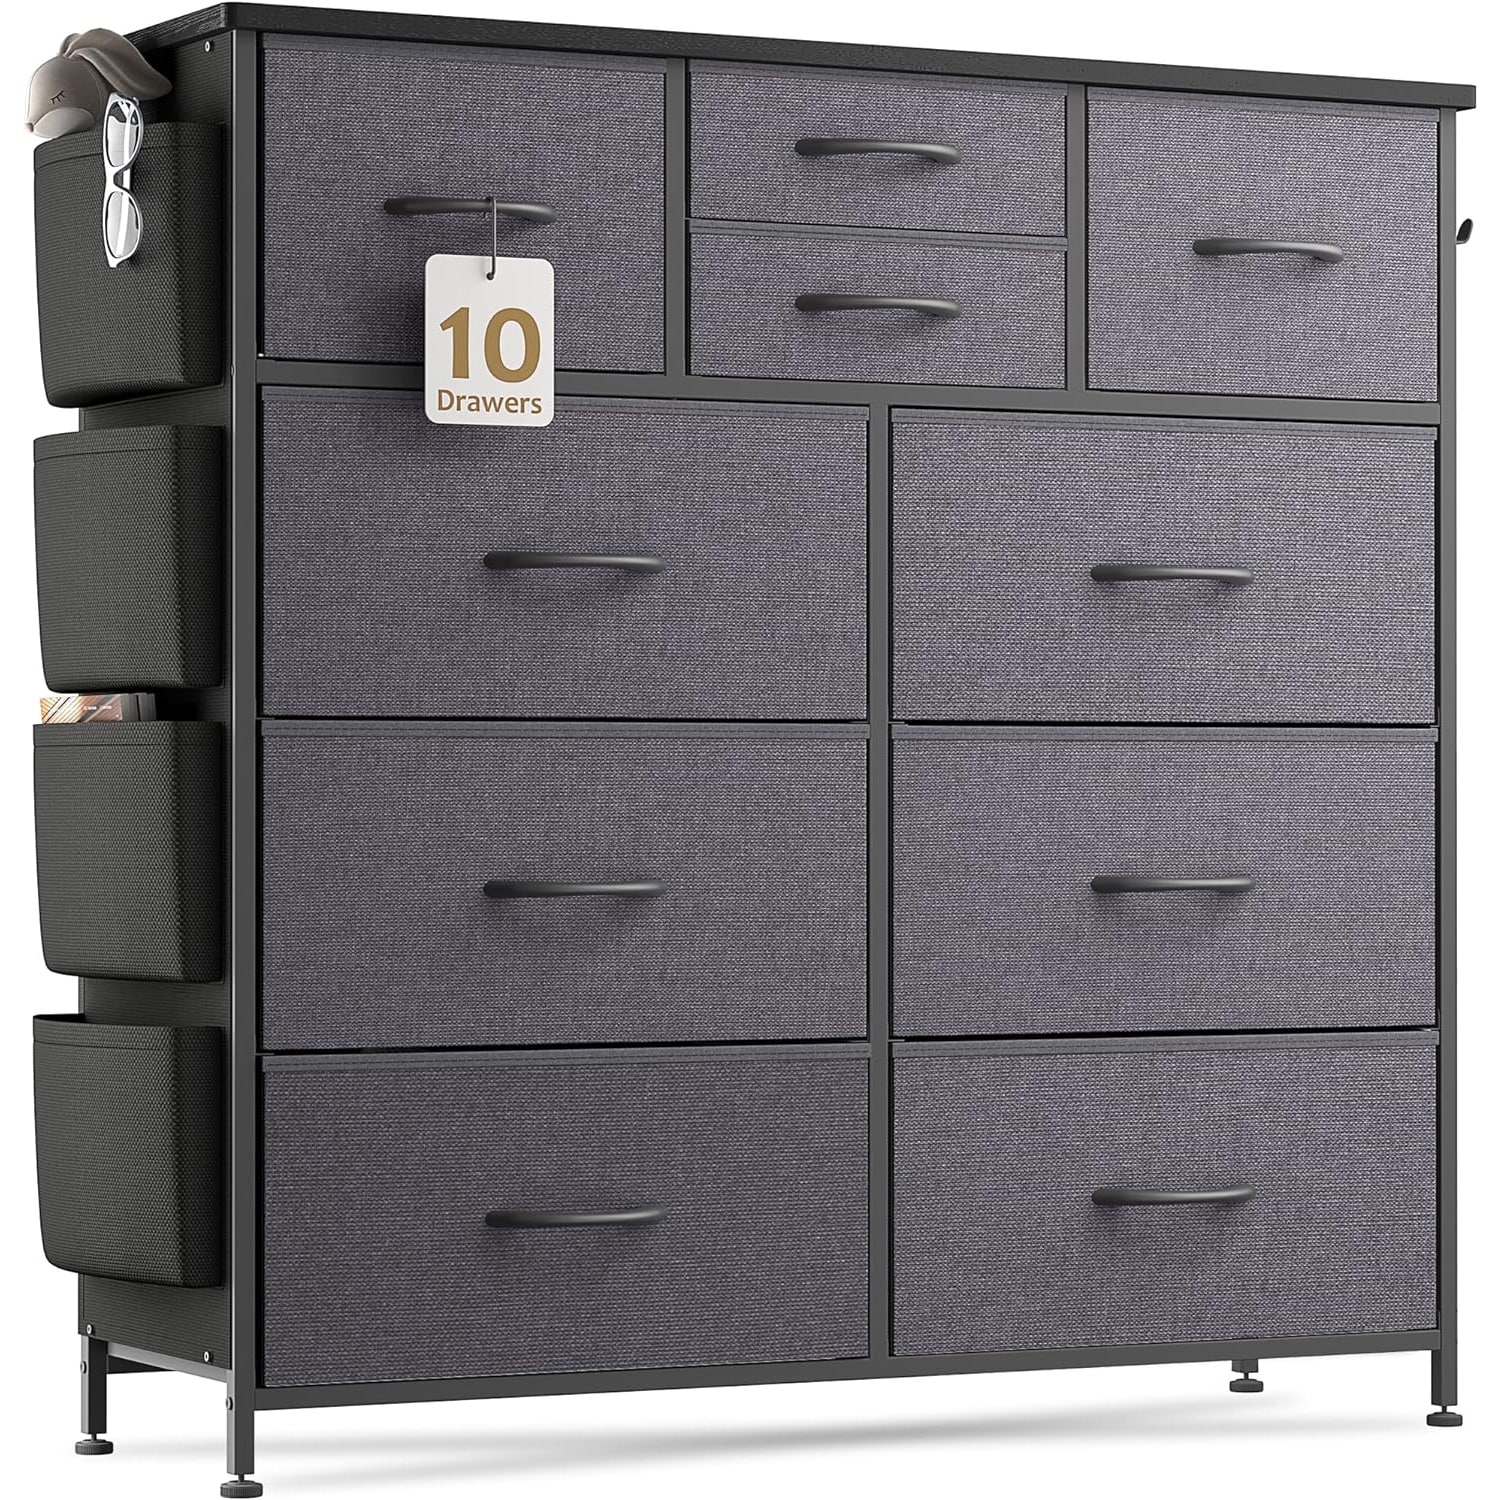 Dresser, Tall Drawer Dresser Organizer with 10 Fabric Storage Drawers,  Steel Frame and Wood Top, Perfect for Bedroom, Closet, or Entryway Storage,  Black 